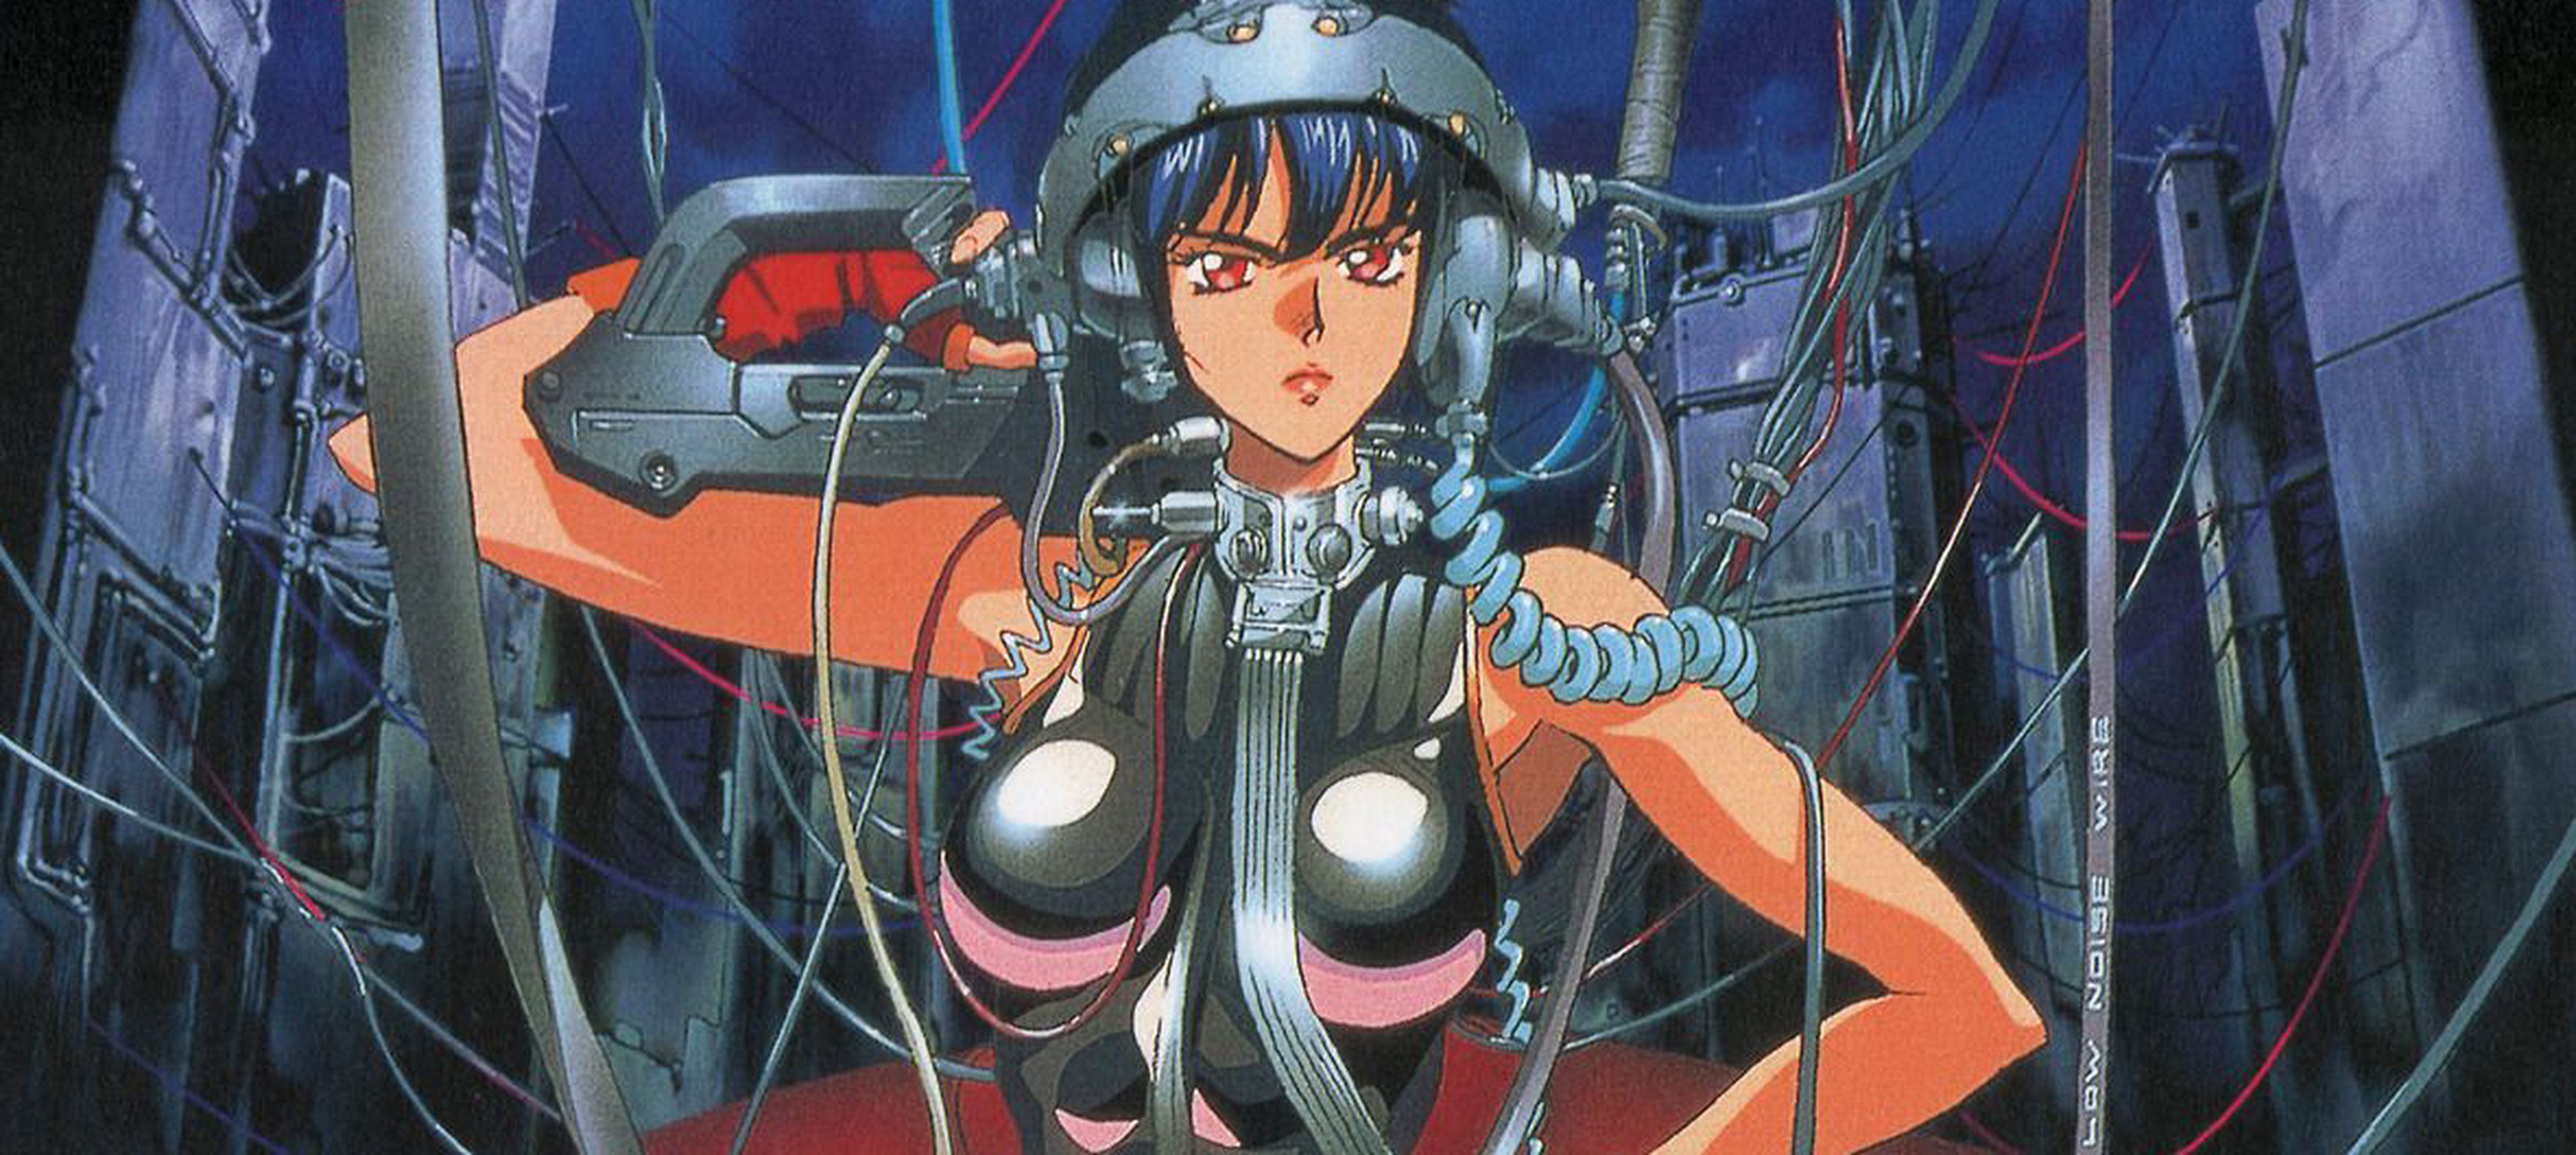 Ghost in the Shell - PlayStation